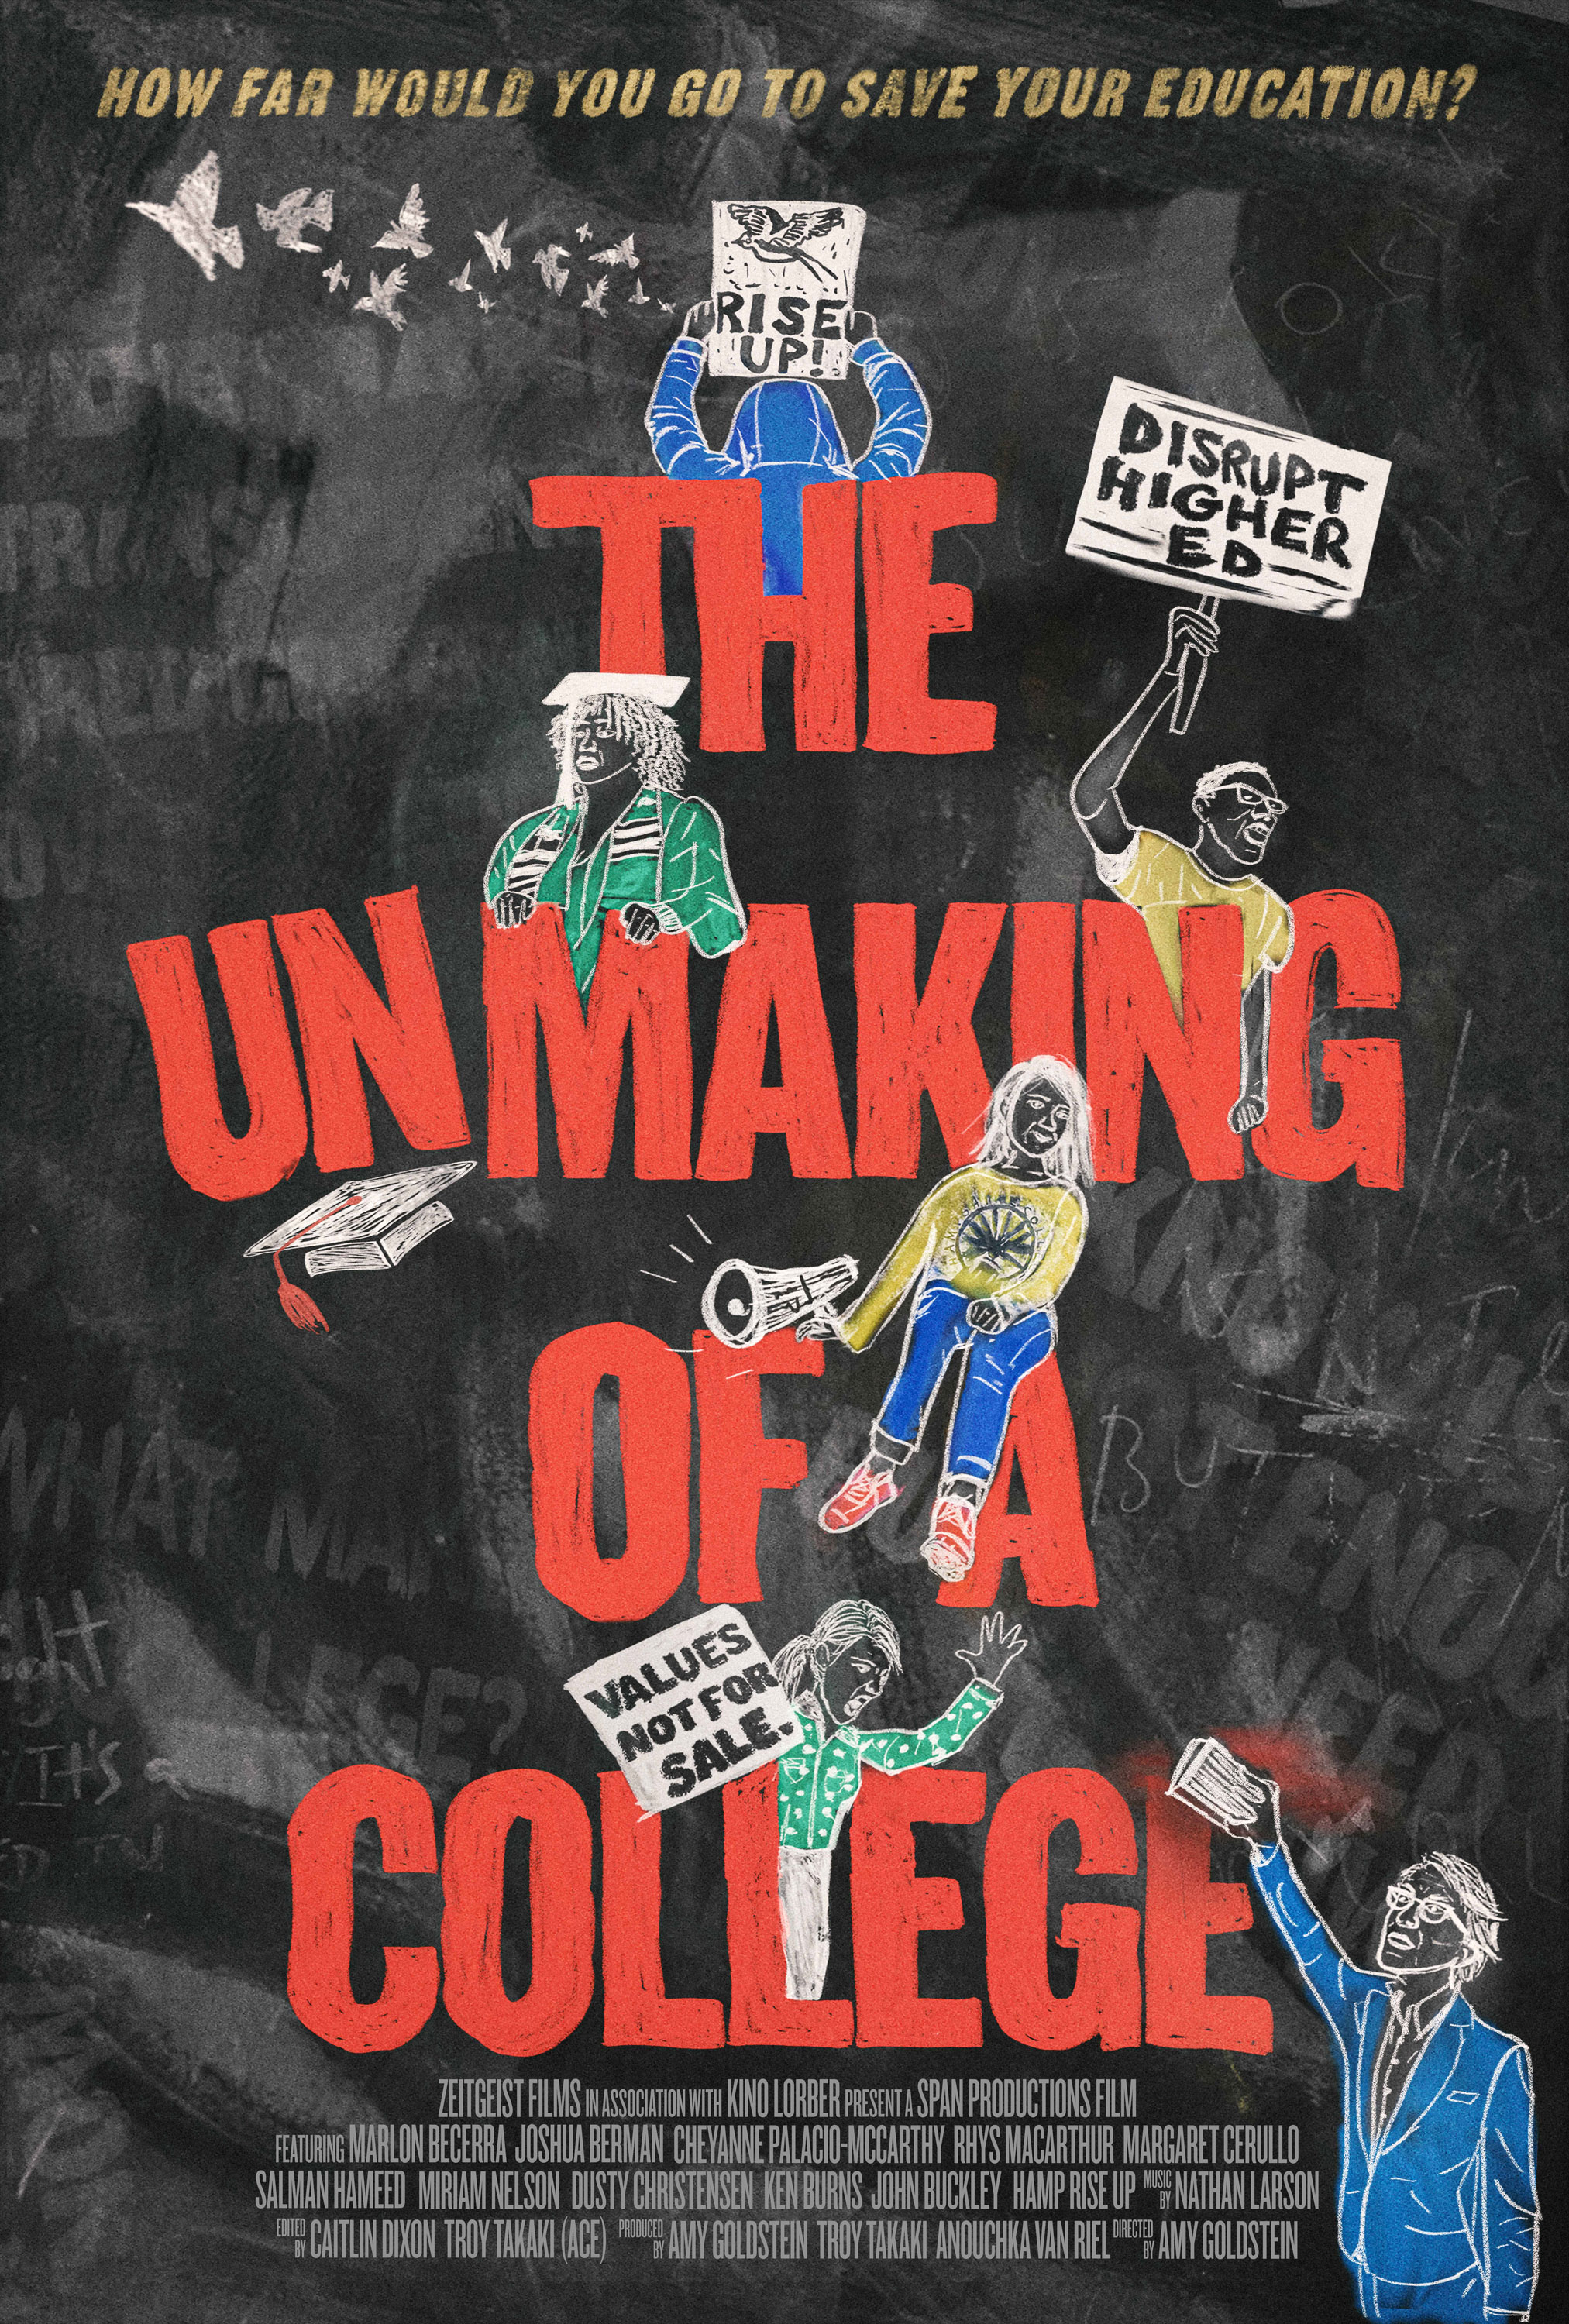 The Unmaking of a College